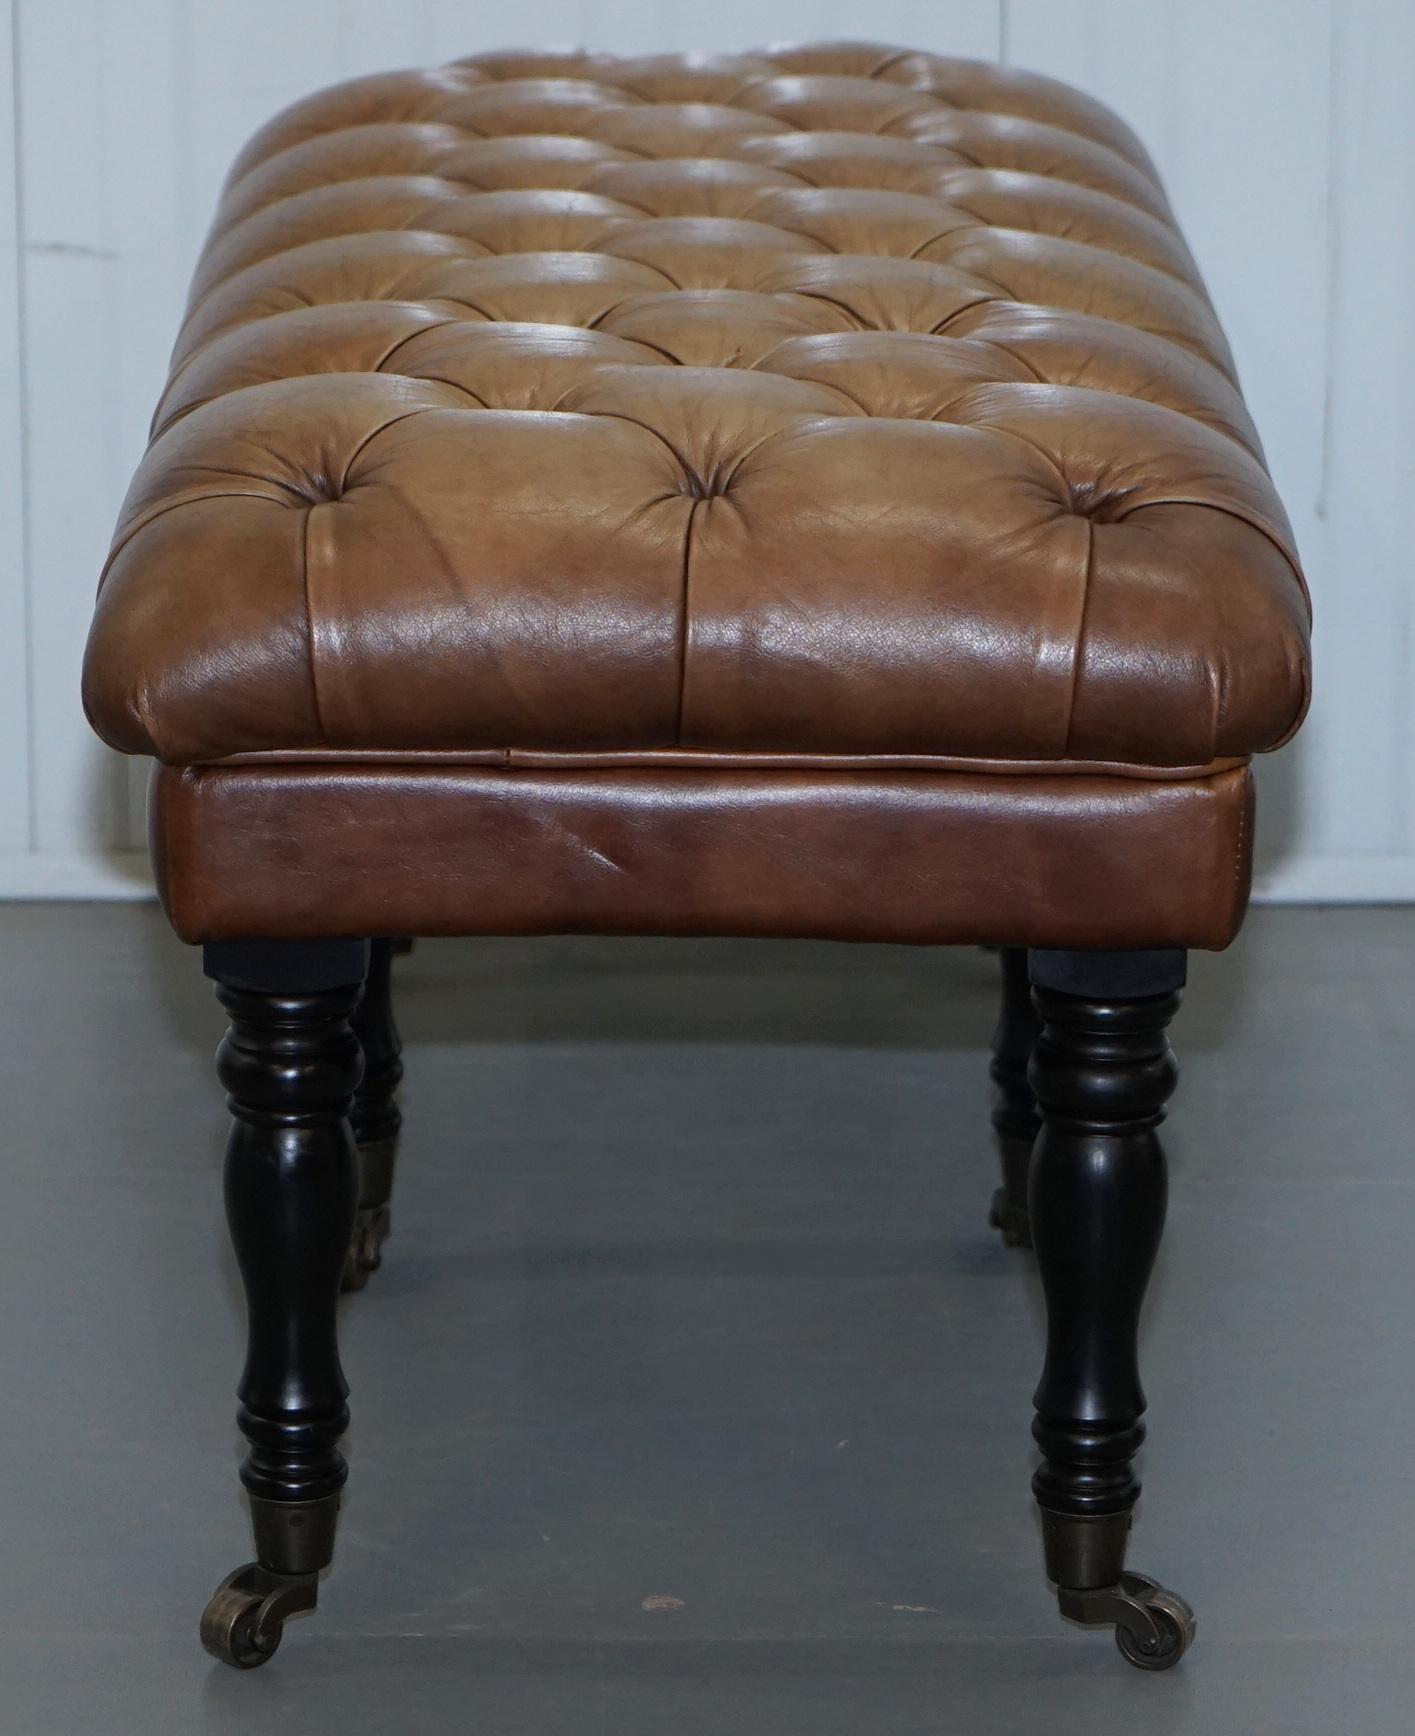 Chesterfield Aged Tan Brown Leather Chesterfield Bench Stool on Wood Turned Legs 5